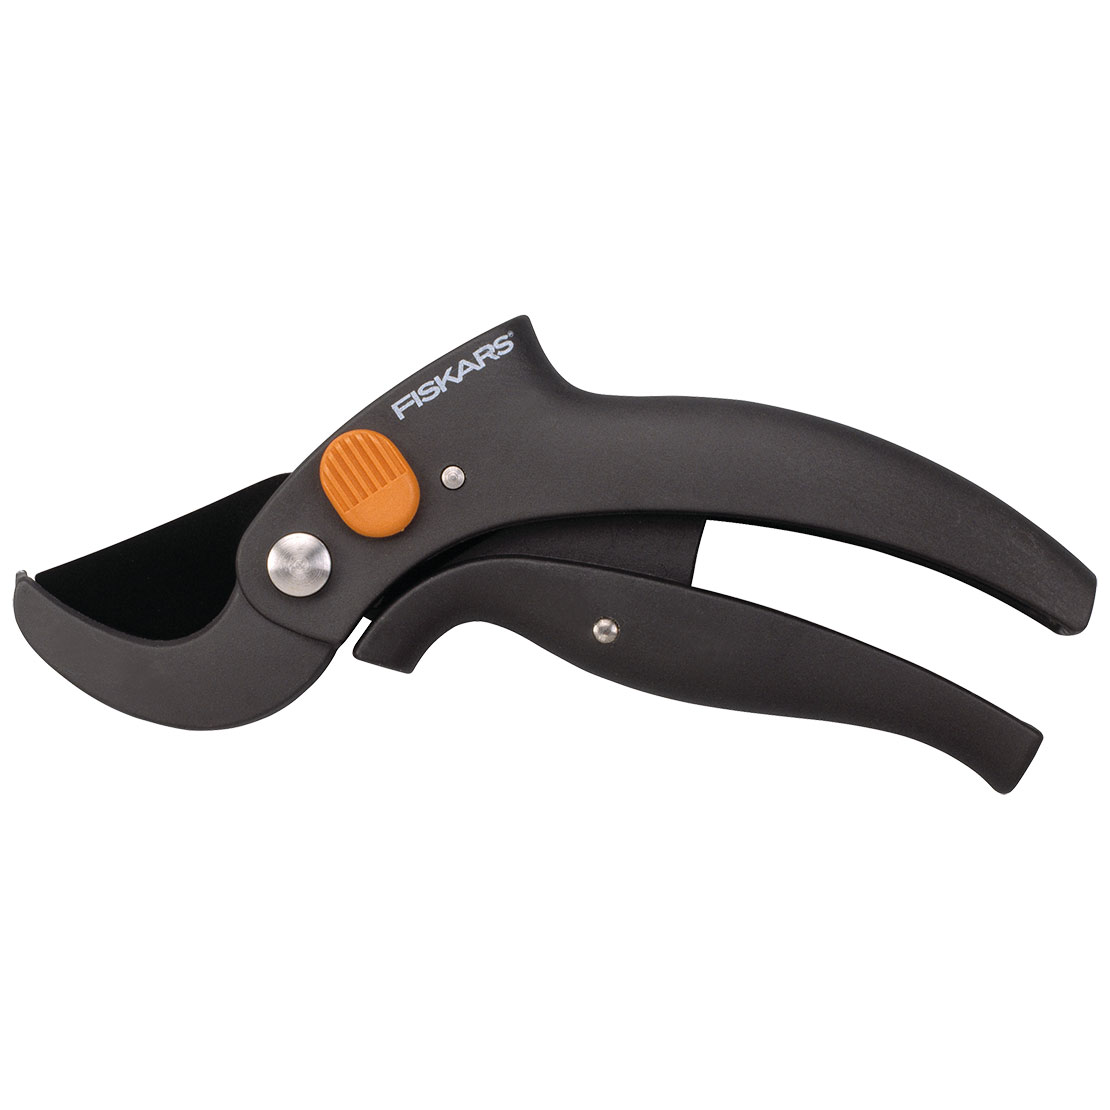 small anvil pruners